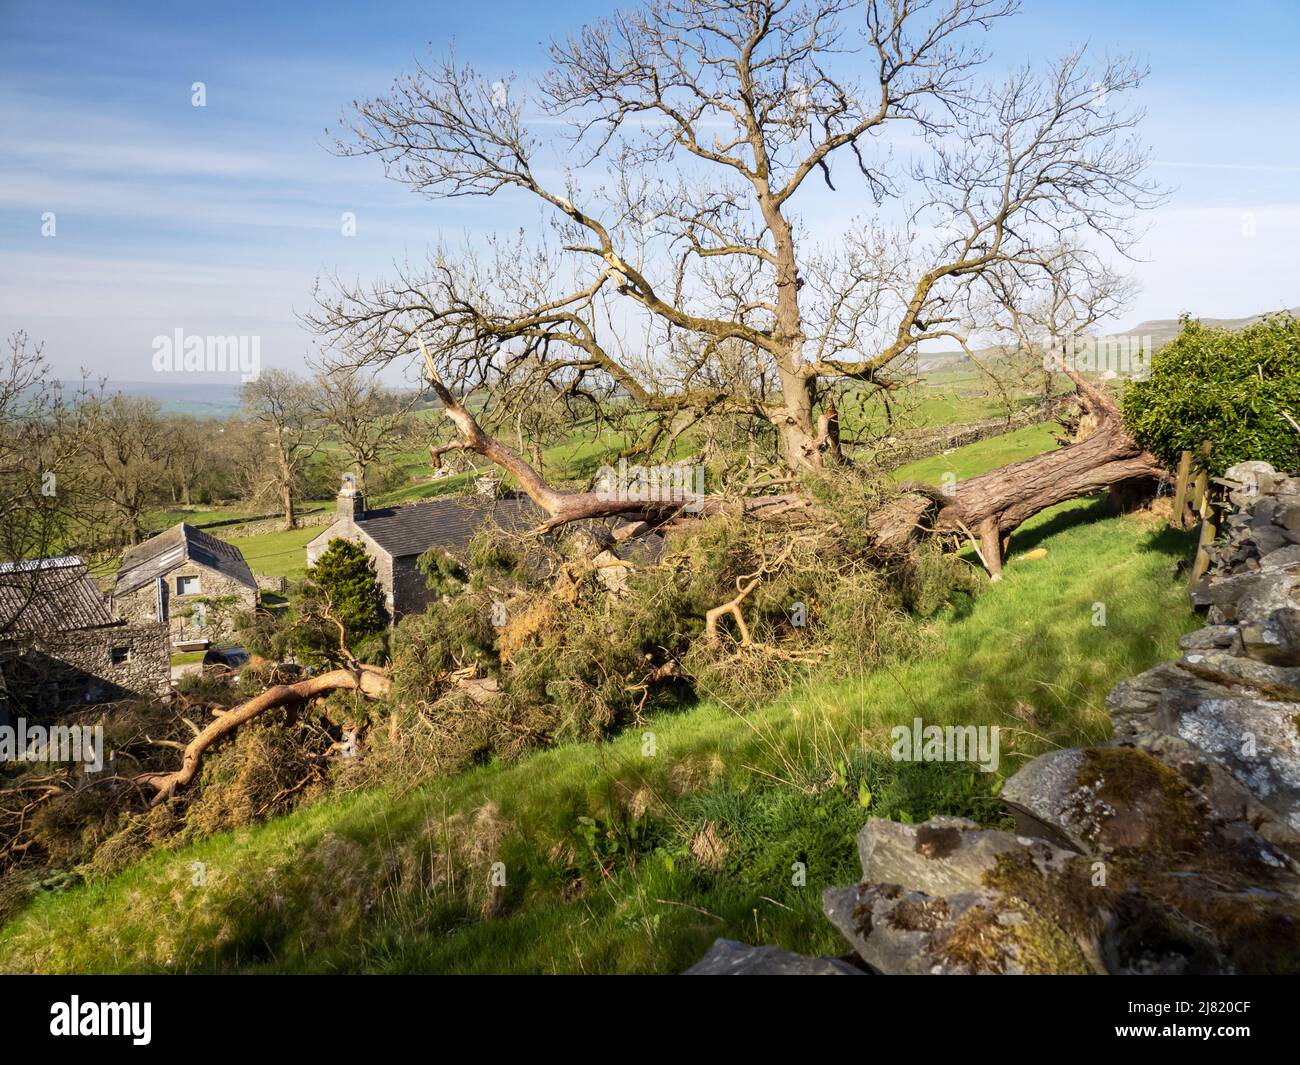 A Scotsd Pine blown over in storm force winds in Wharfe, Yorkshire, Dales, UK. Stock Photo